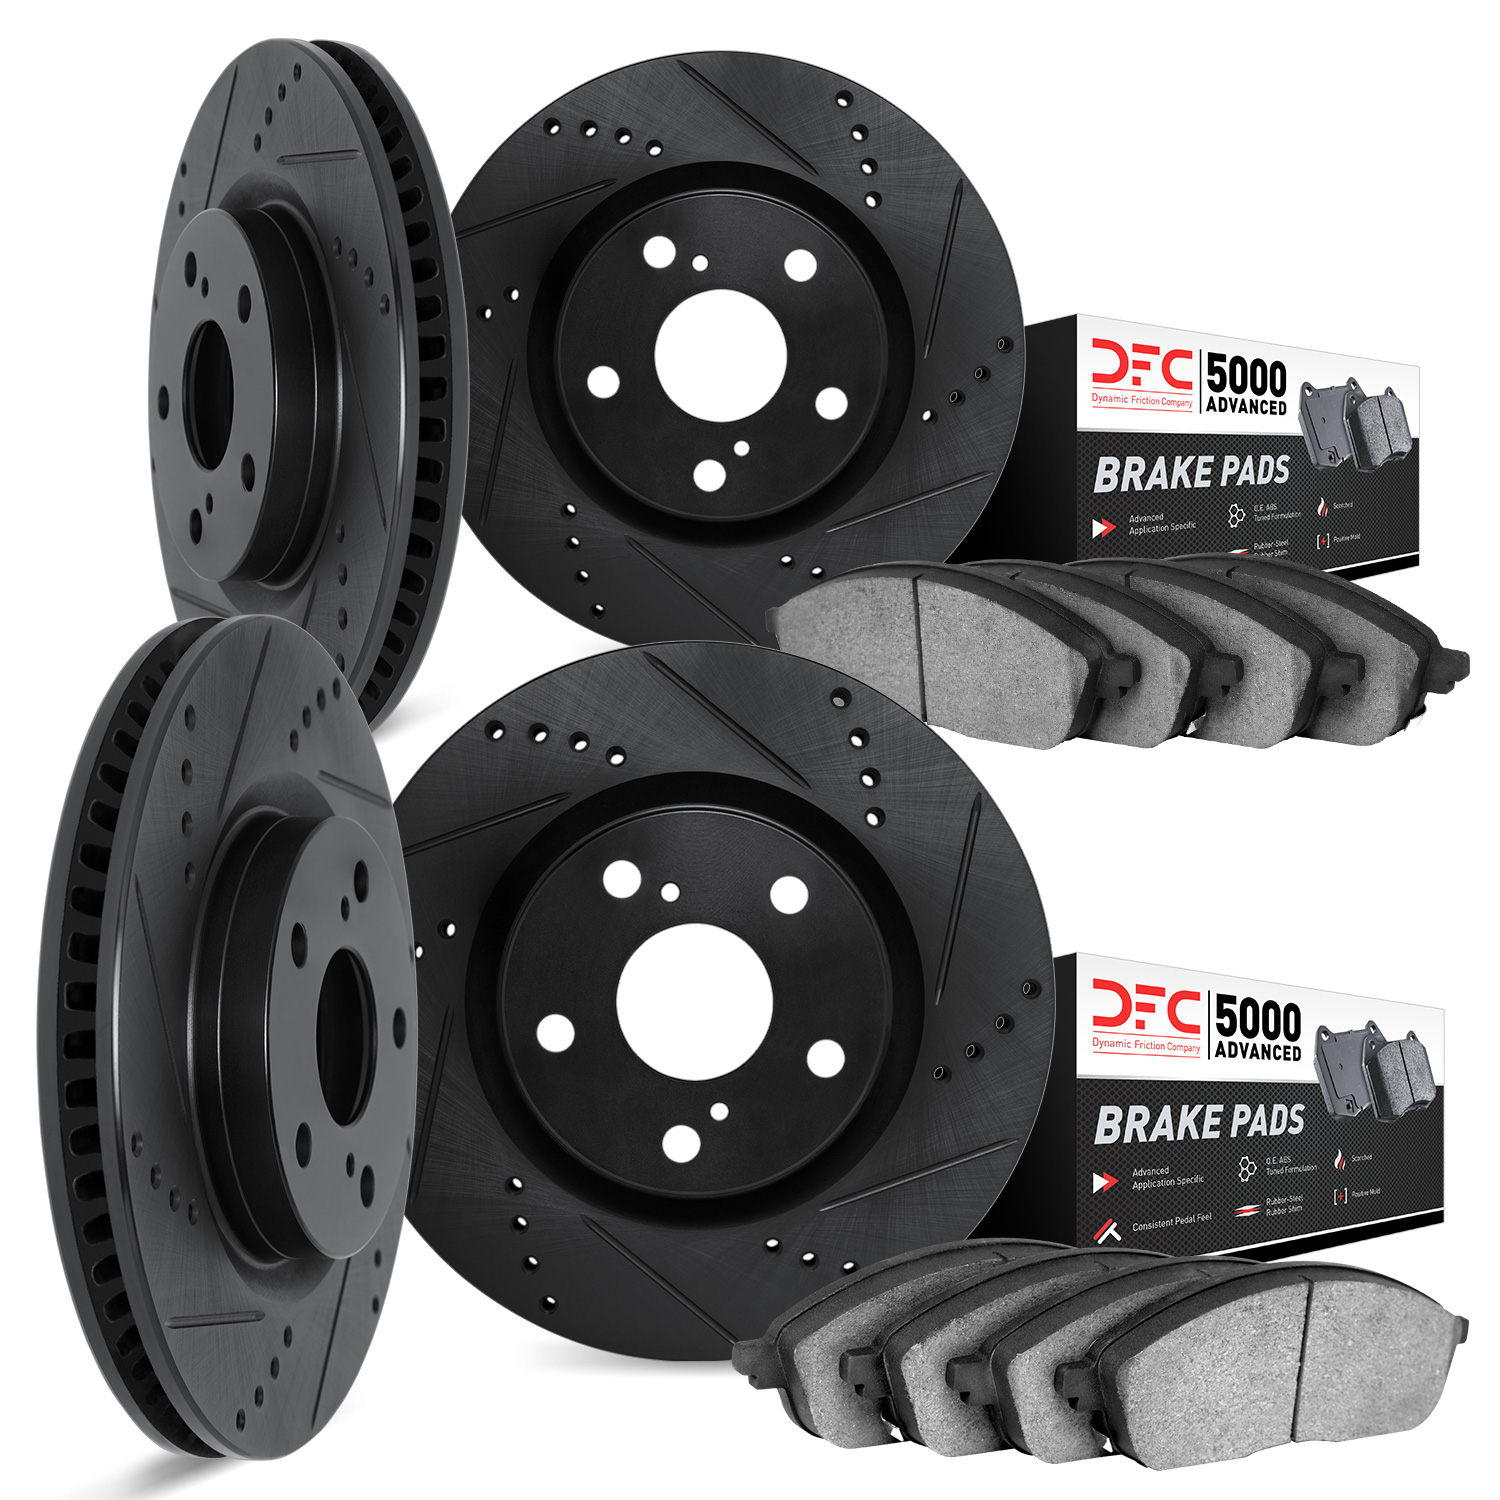 8504-31065 Drilled/Slotted Brake Rotors w/5000 Advanced Brake Pads Kit [Black], 2007-2010 BMW, Position: Front and Rear